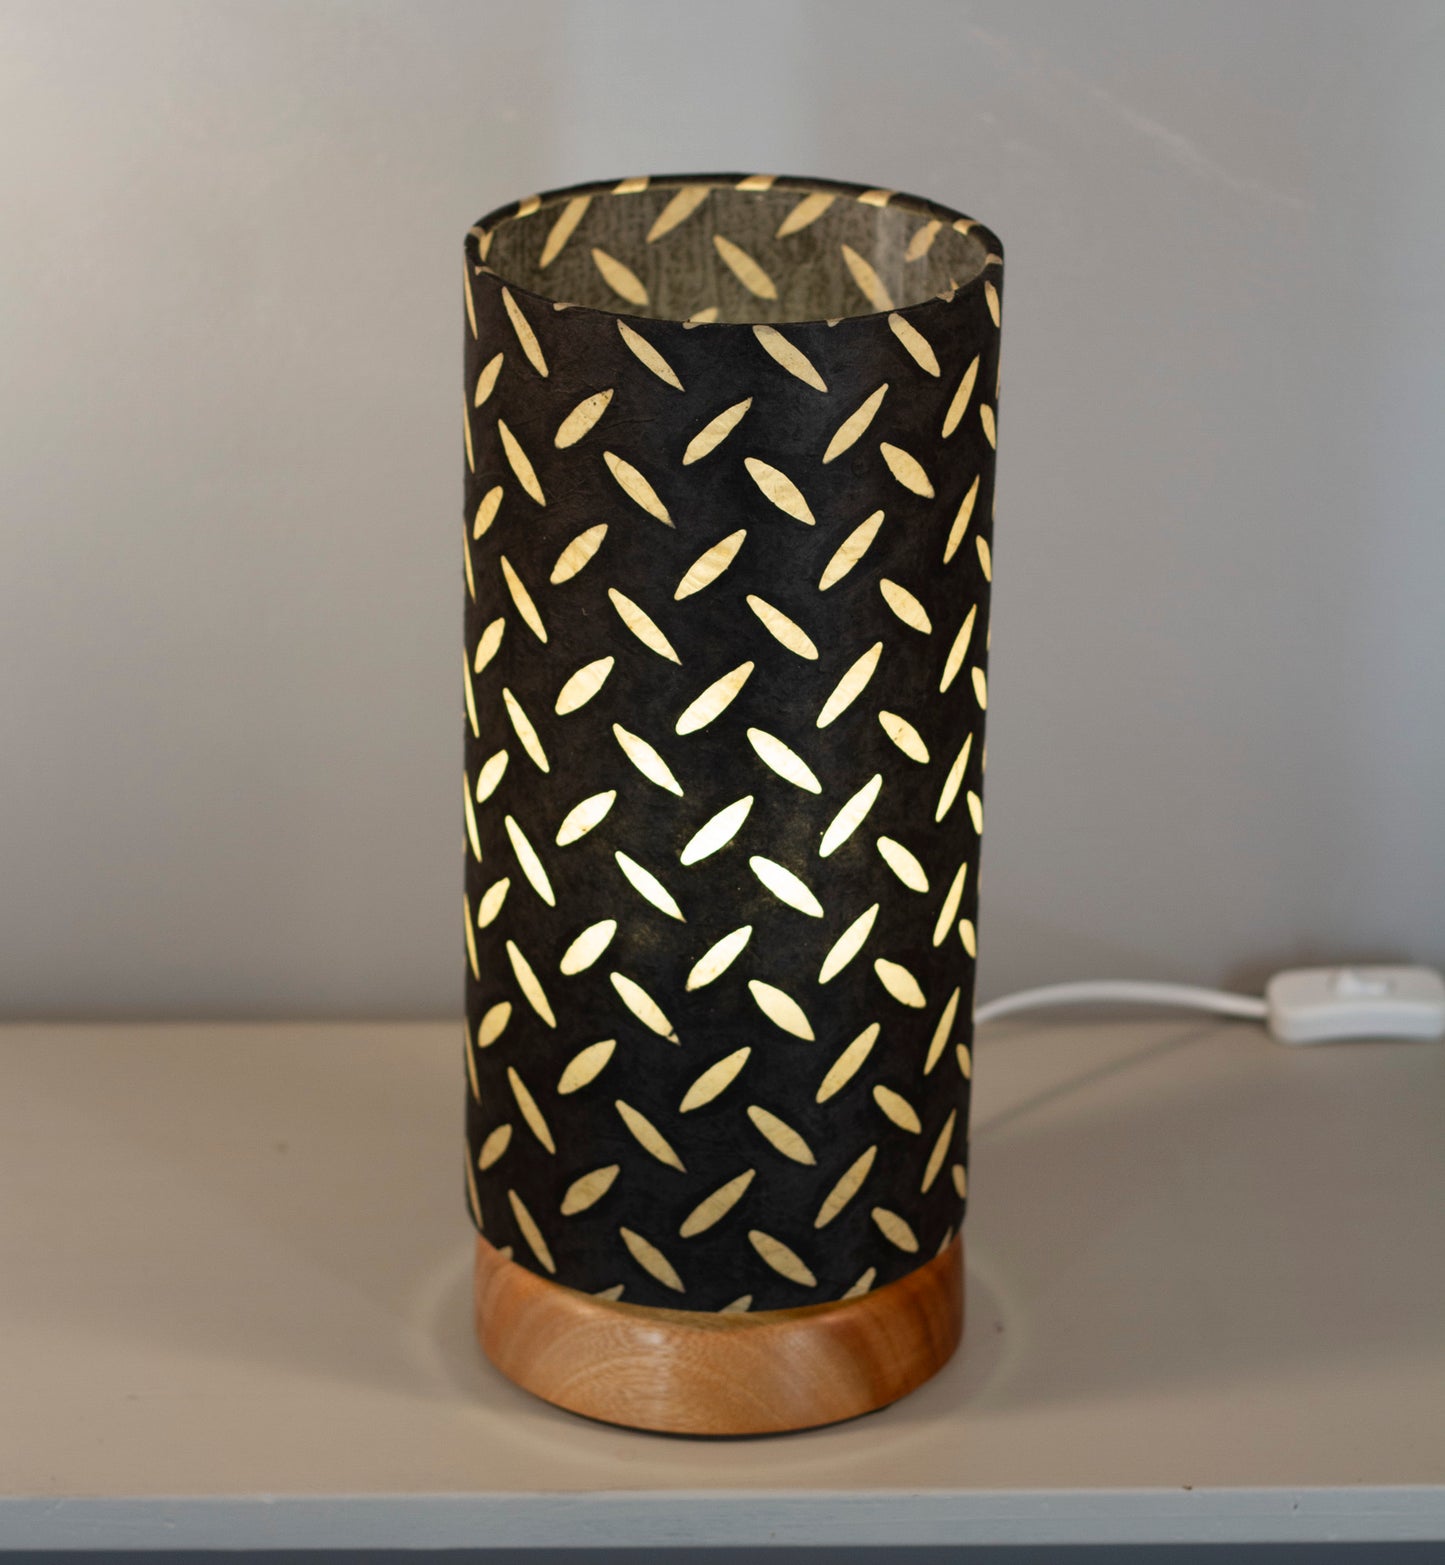 Flat Round Sapele Table Lamp with 15cm x 30cm Lampshade in P11 ~ Batik Tread Plate Black